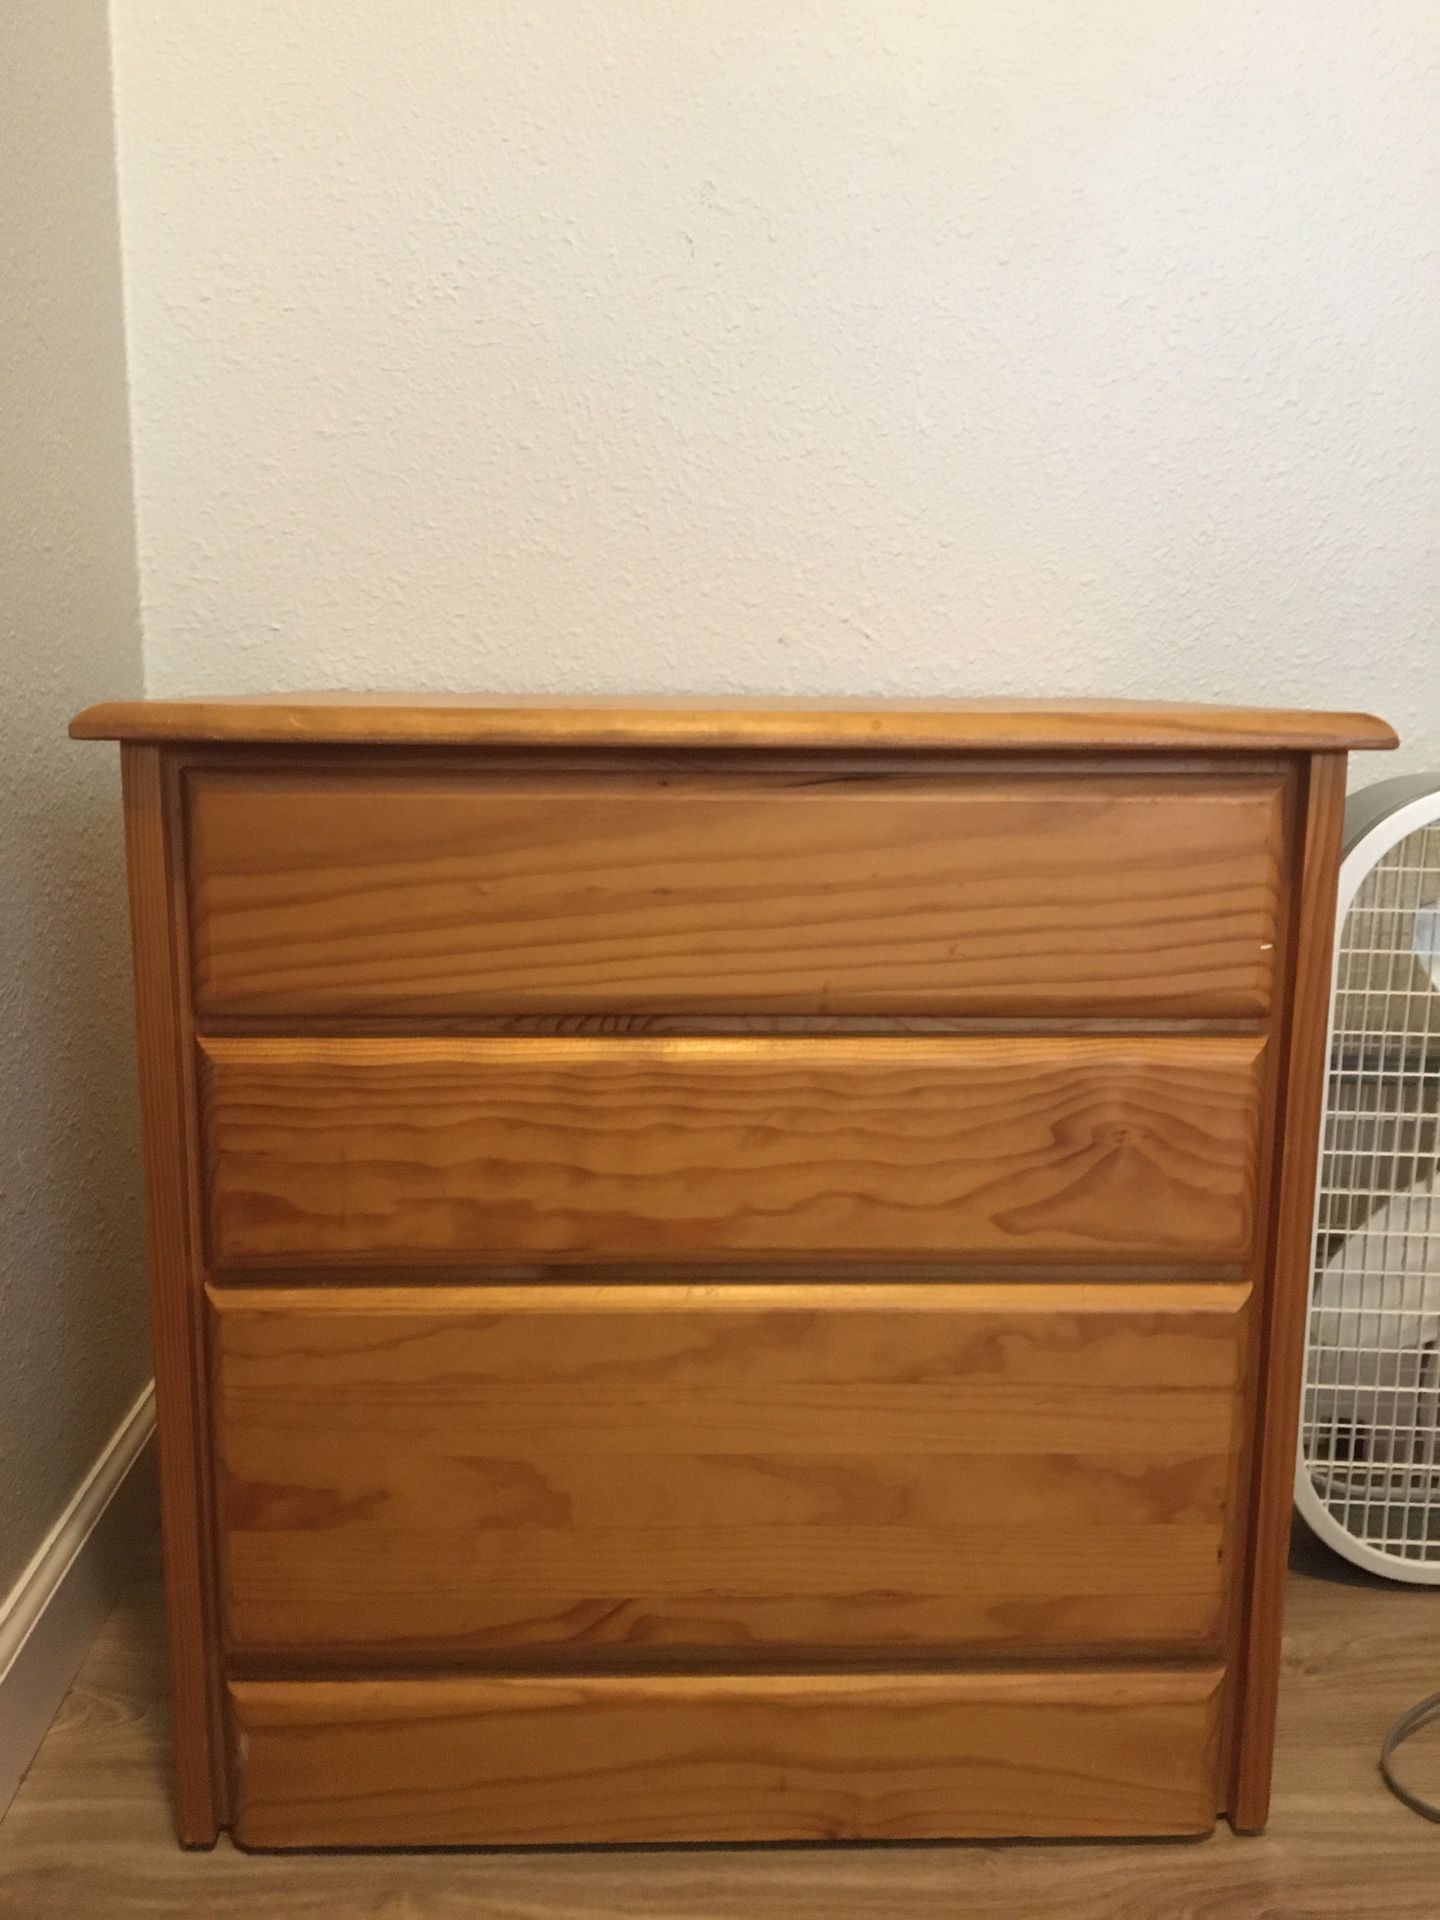 nightstand with drawers